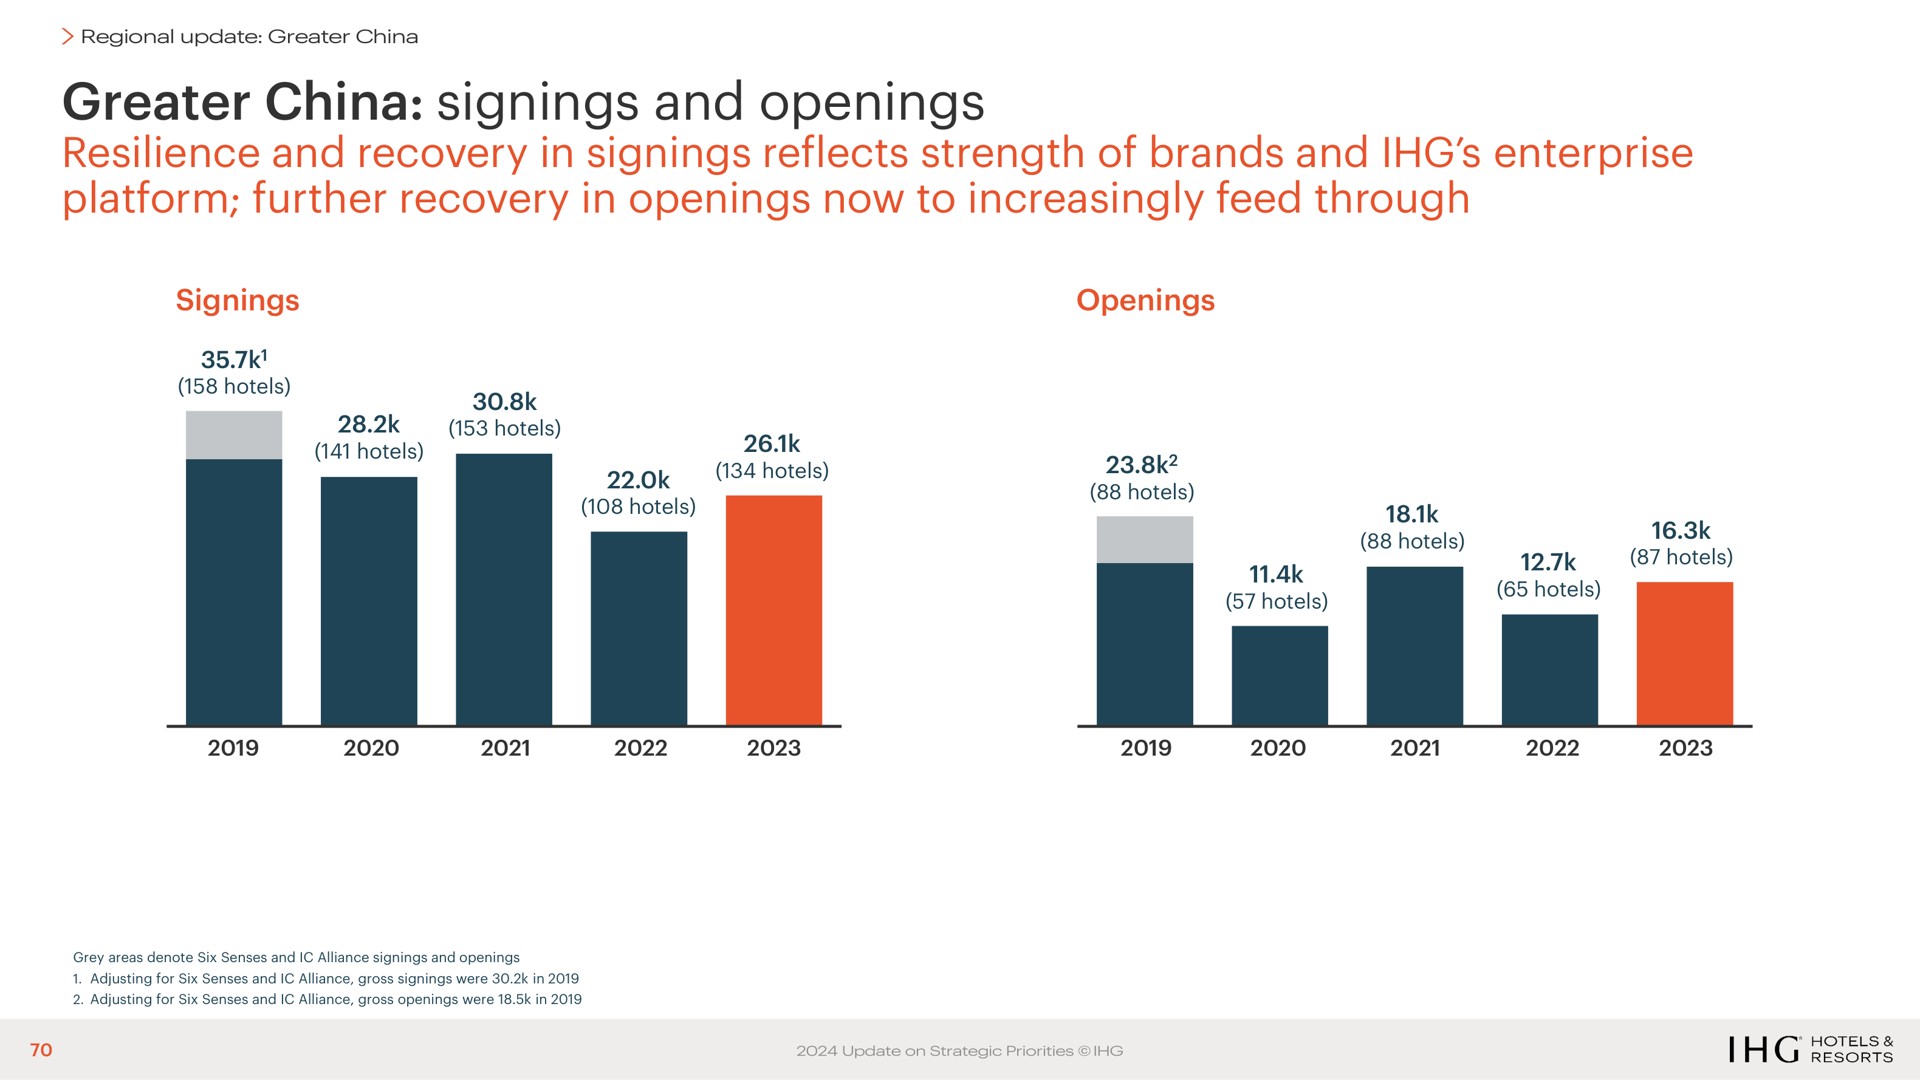 greater china signings and openings resilience and recovery in signings reflects strength of brands and enterprise platform further recovery in openings now to increasingly feed through | IHG Hotels